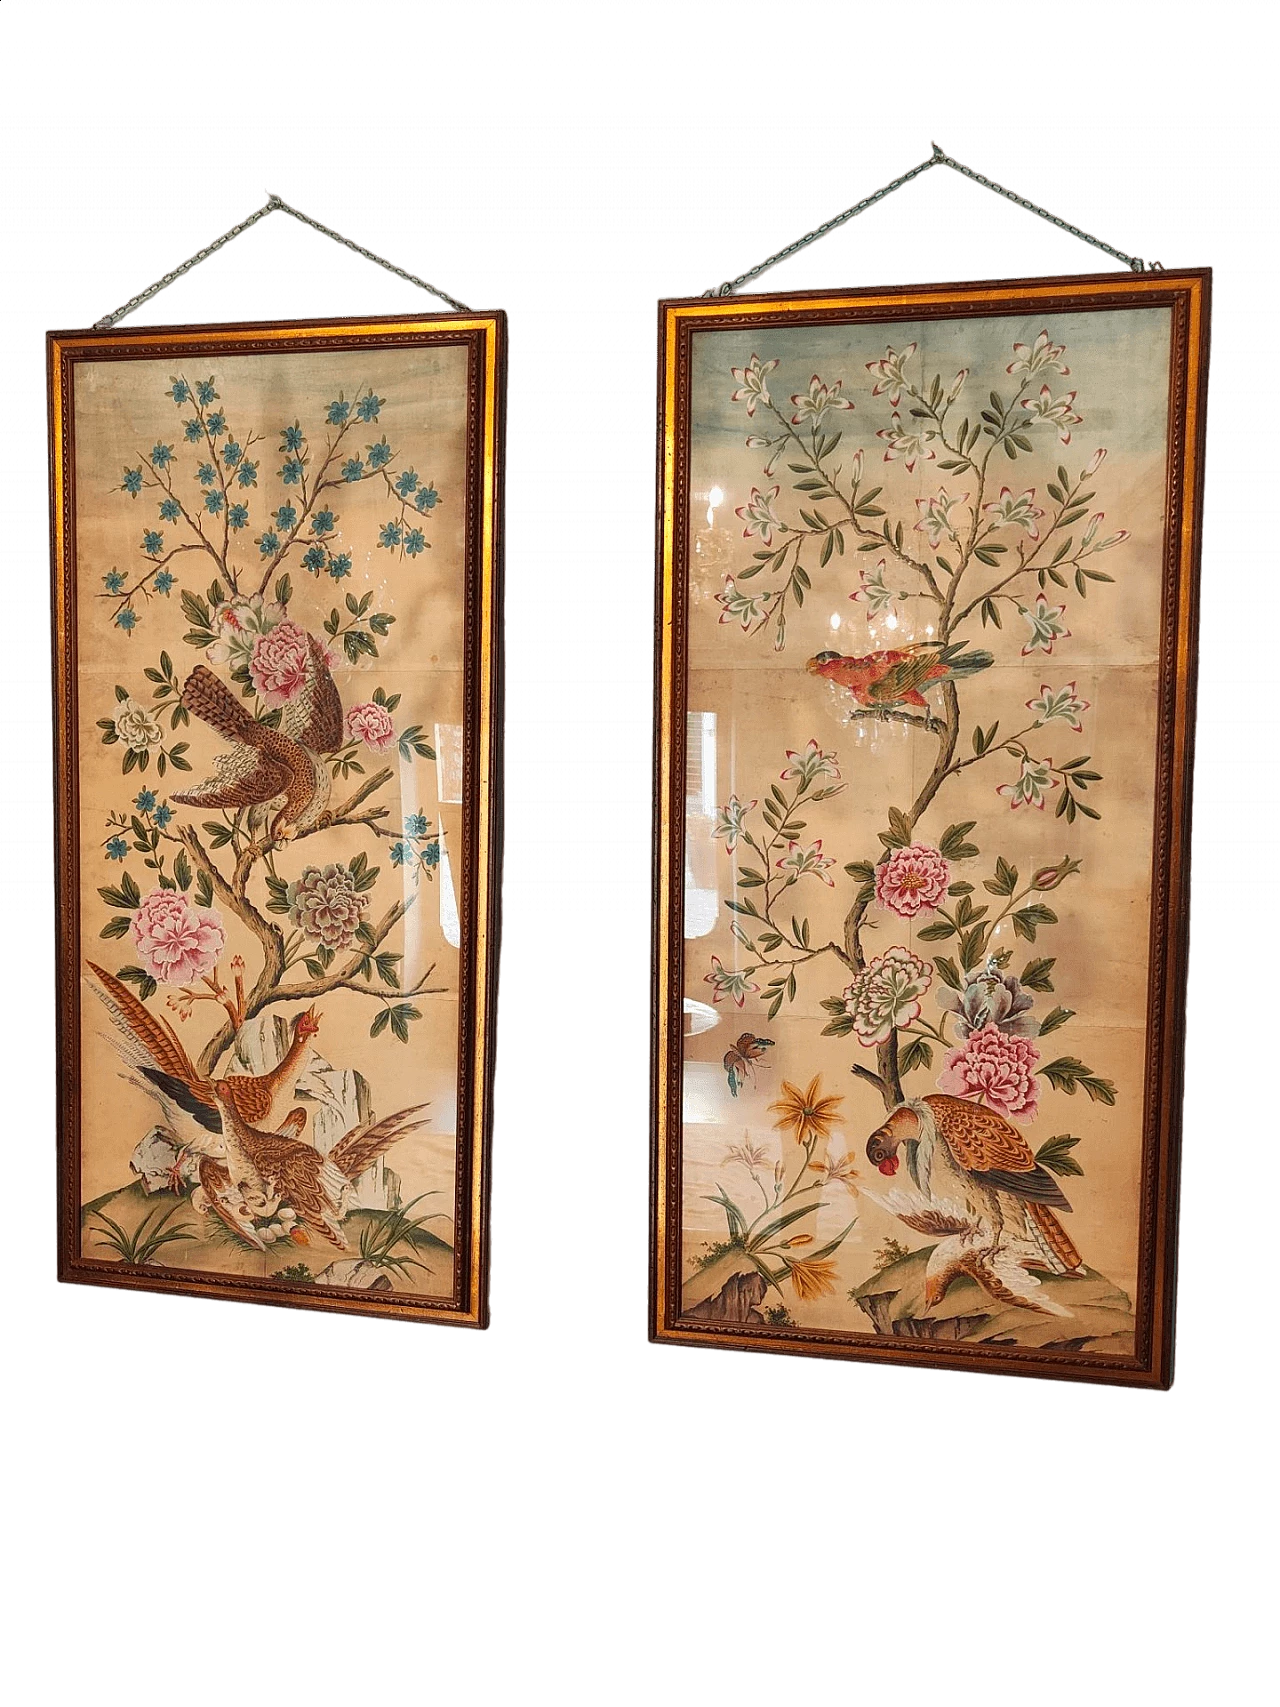 Pair of chinoiserie panels painted tempera on paper, 18th century 12